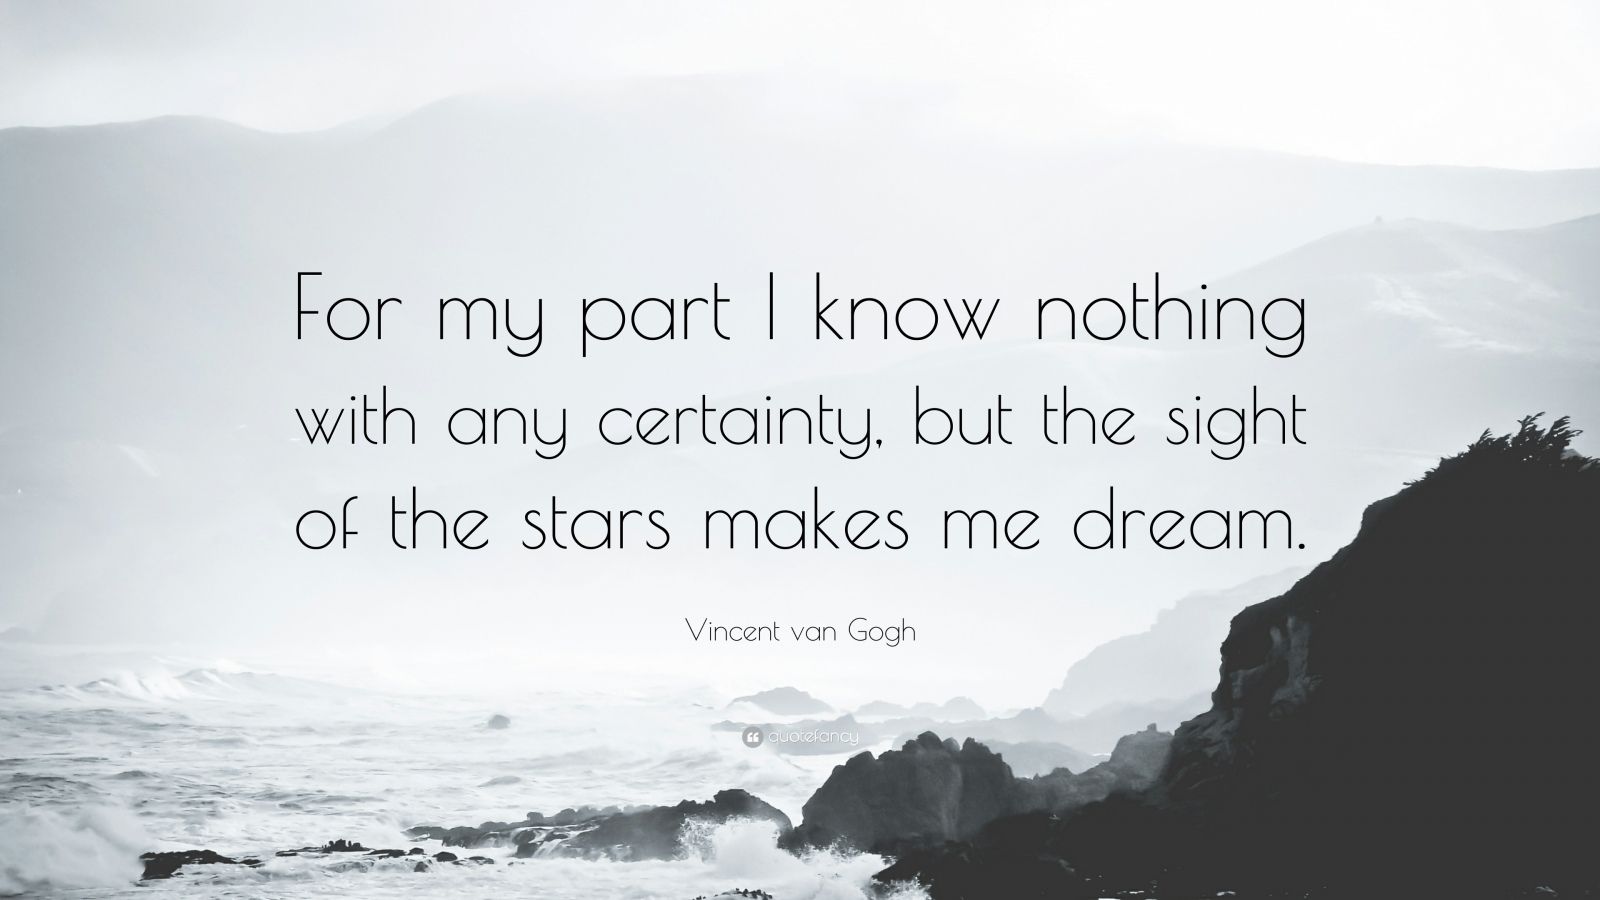 Vincent van Gogh Quote: “For my part I know nothing with any certainty ...